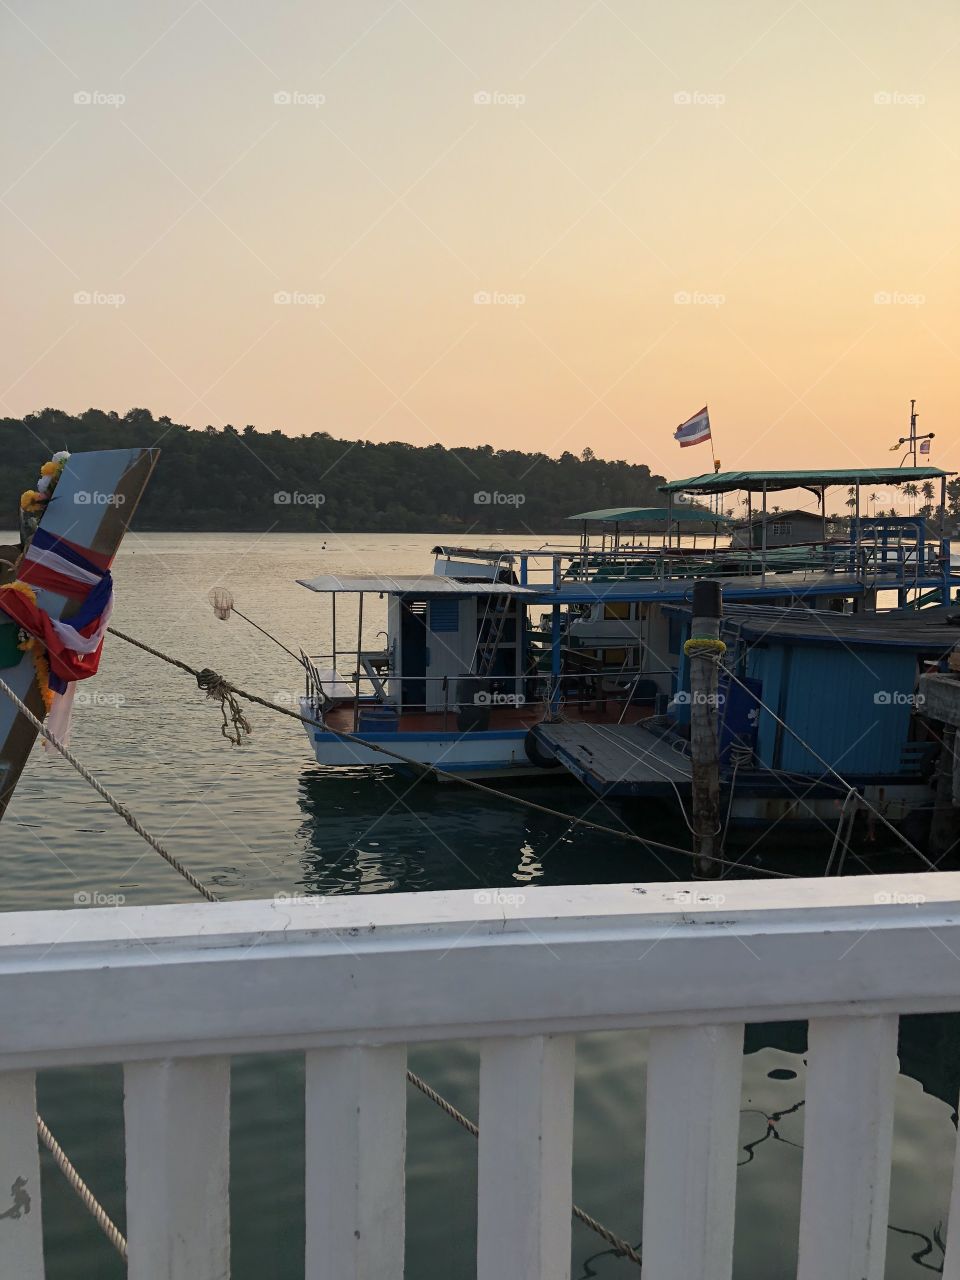 My study abroad program organized a trip for us to Koh Chang, Thailand. This is the sunset over the boats and floating market!